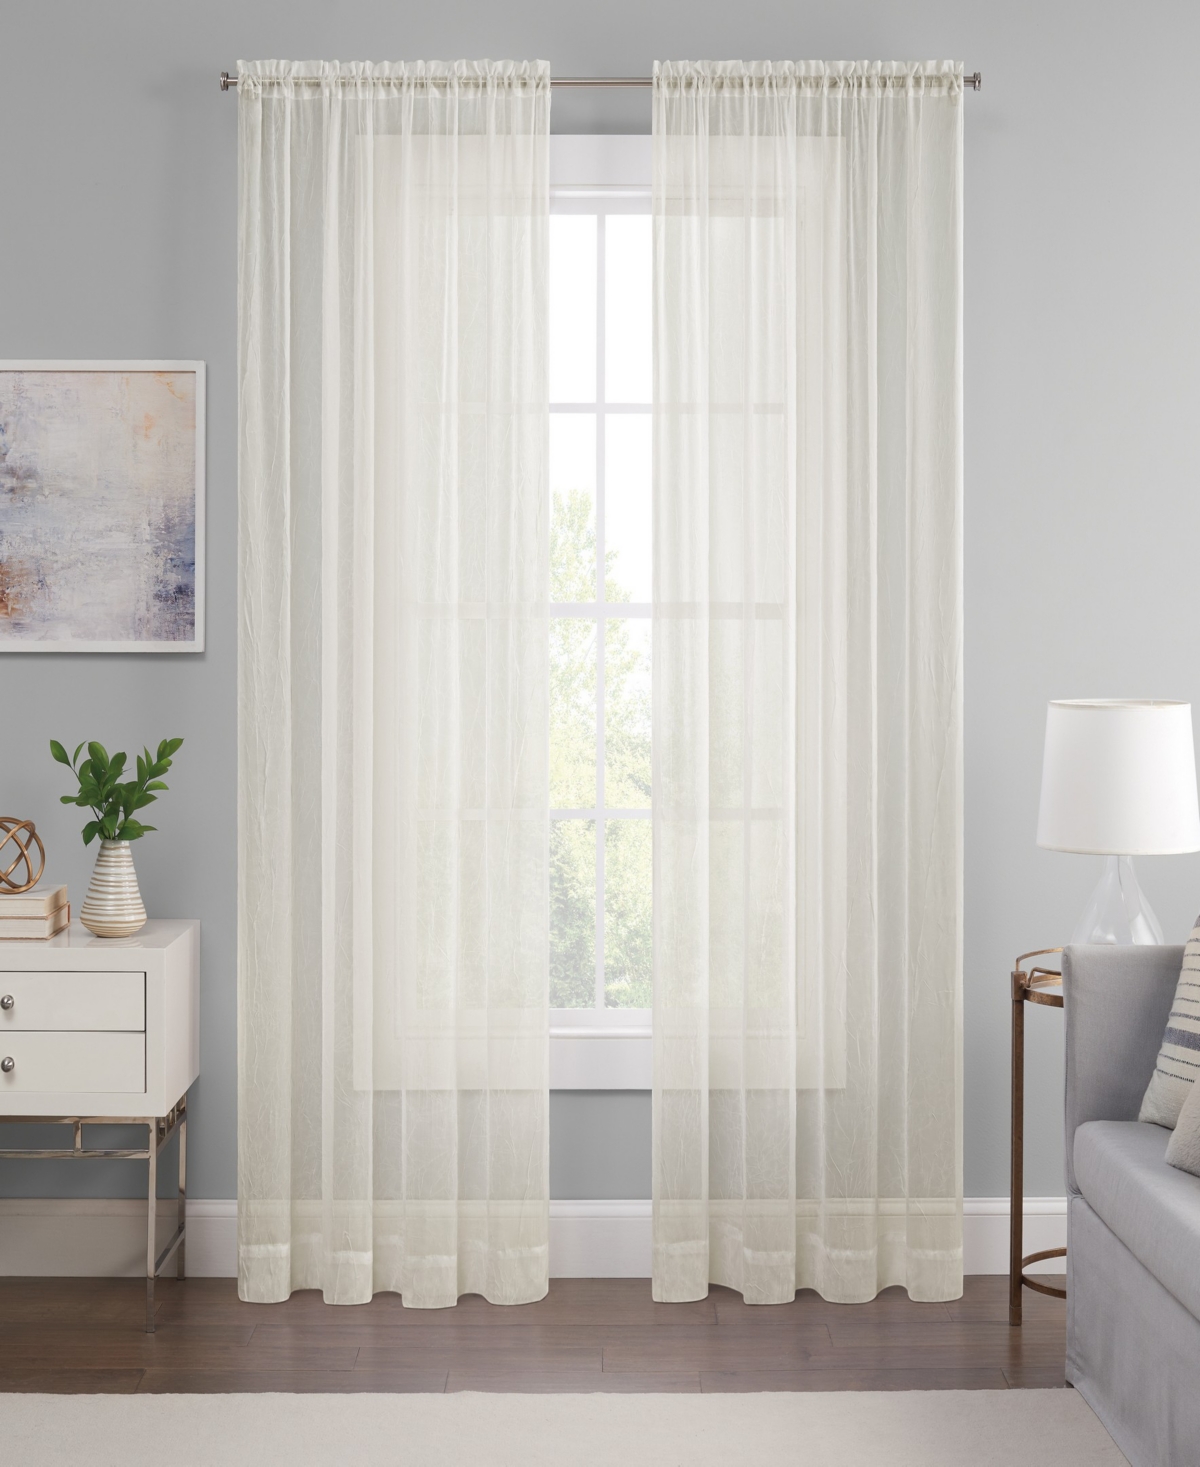 Eclipse Emina Crushed Sheer Voile Rod Pocket Curtain Panel, 52" X 95" In Ivory